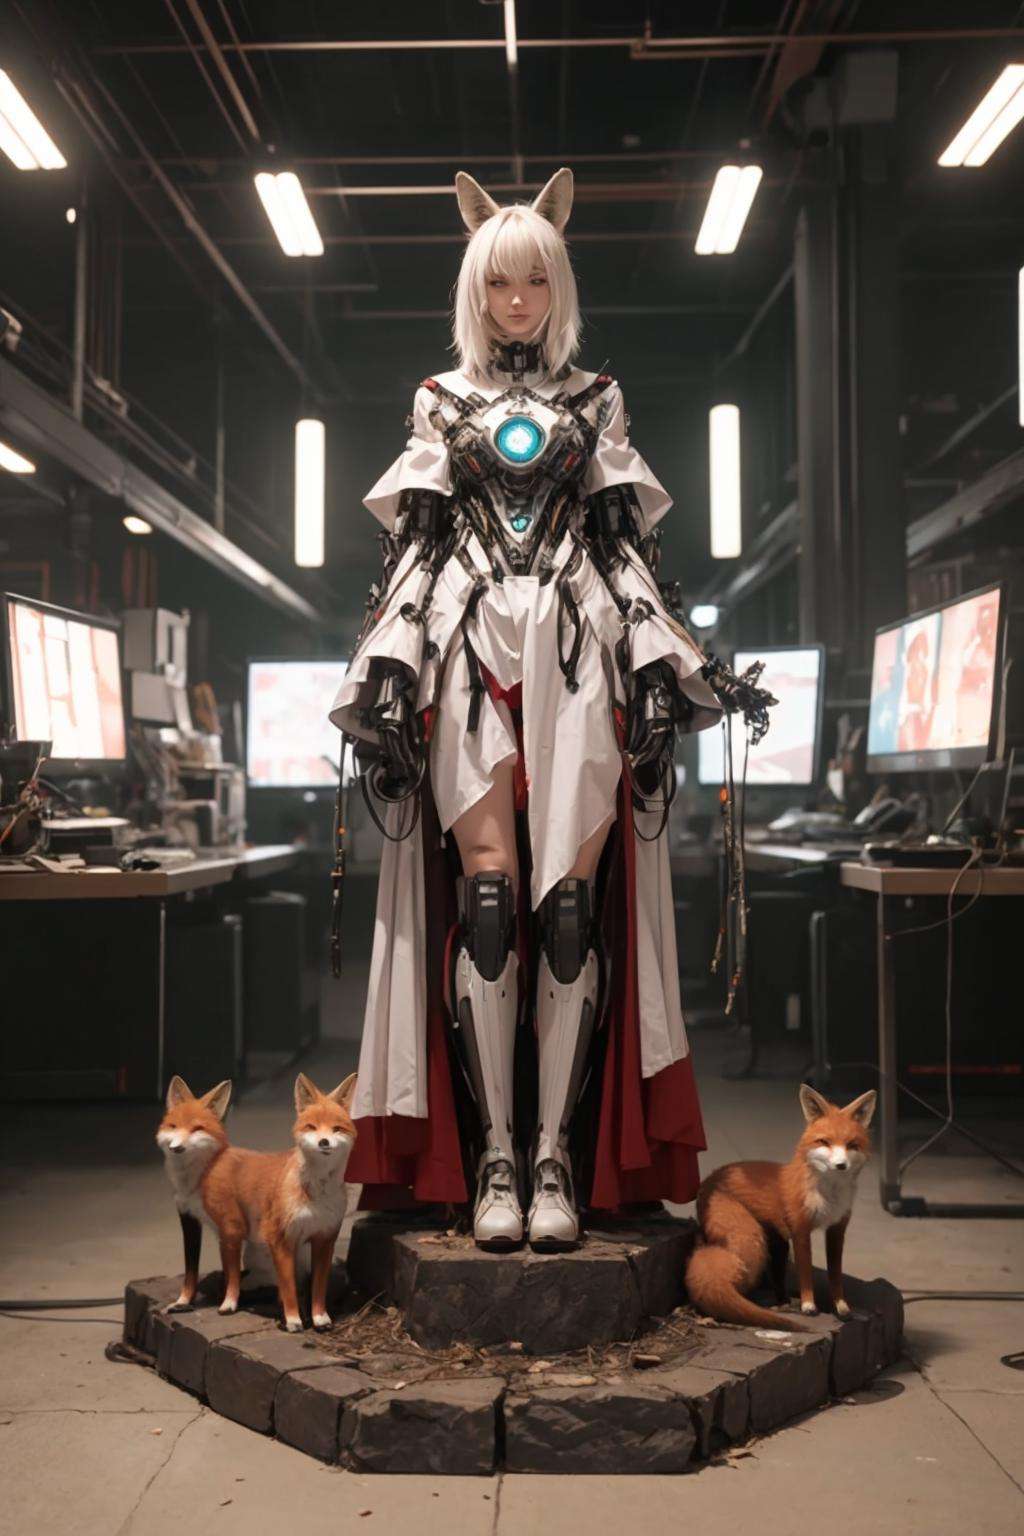 futubot, cyberpunk shrine maiden with fox ears and fox tails, dark white and bold red colors, natural lighting, robot fox companions, center of image, background futuristic shrine,  <lora:Futuristicbotv.2:0.7> 